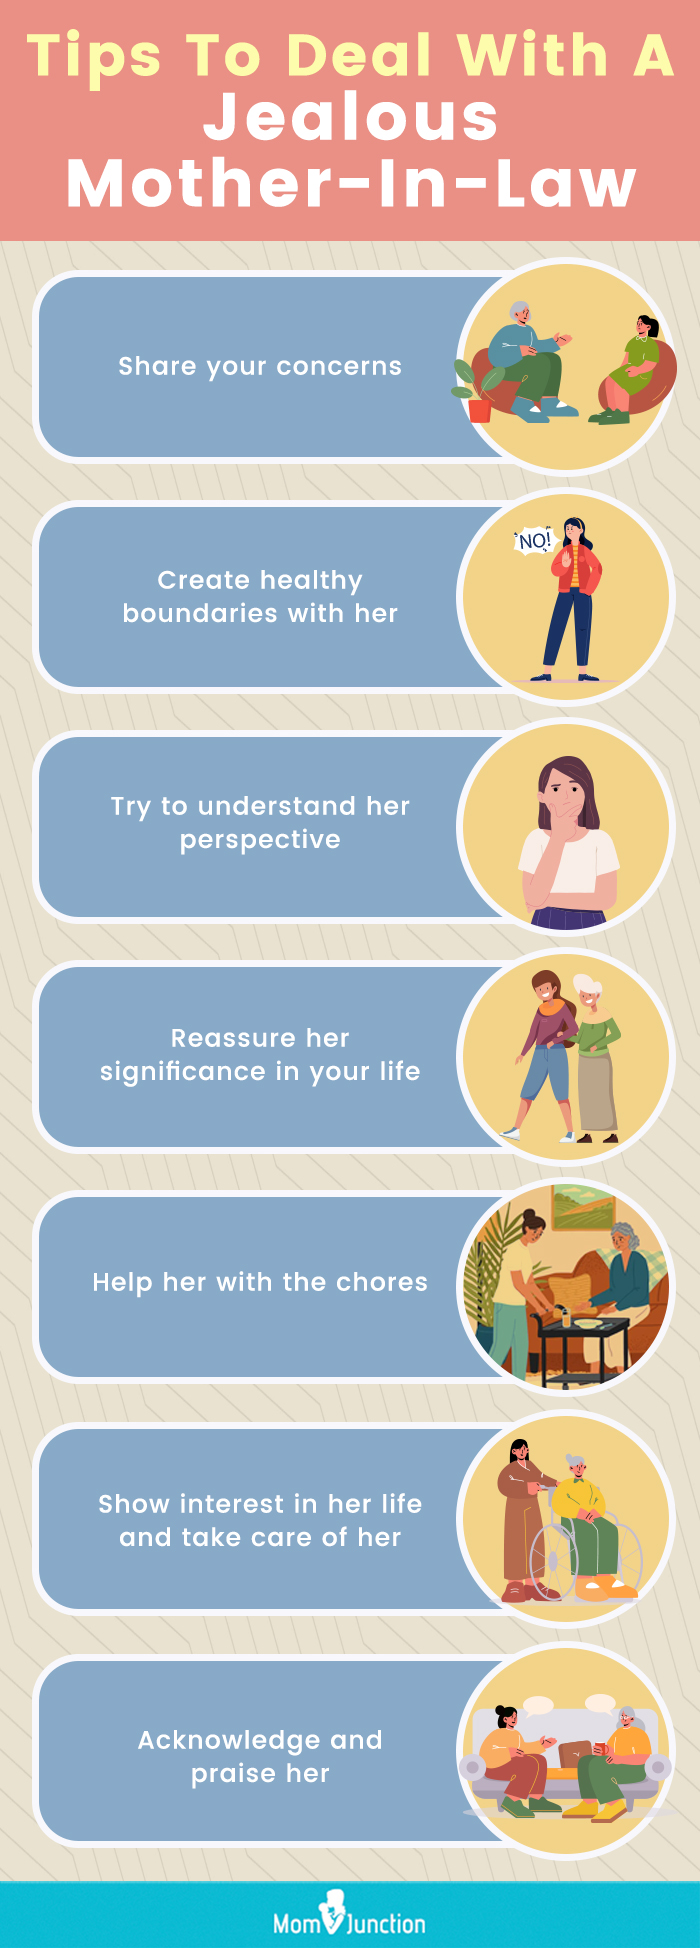 tips to deal with a jealous mother in law (infographic)